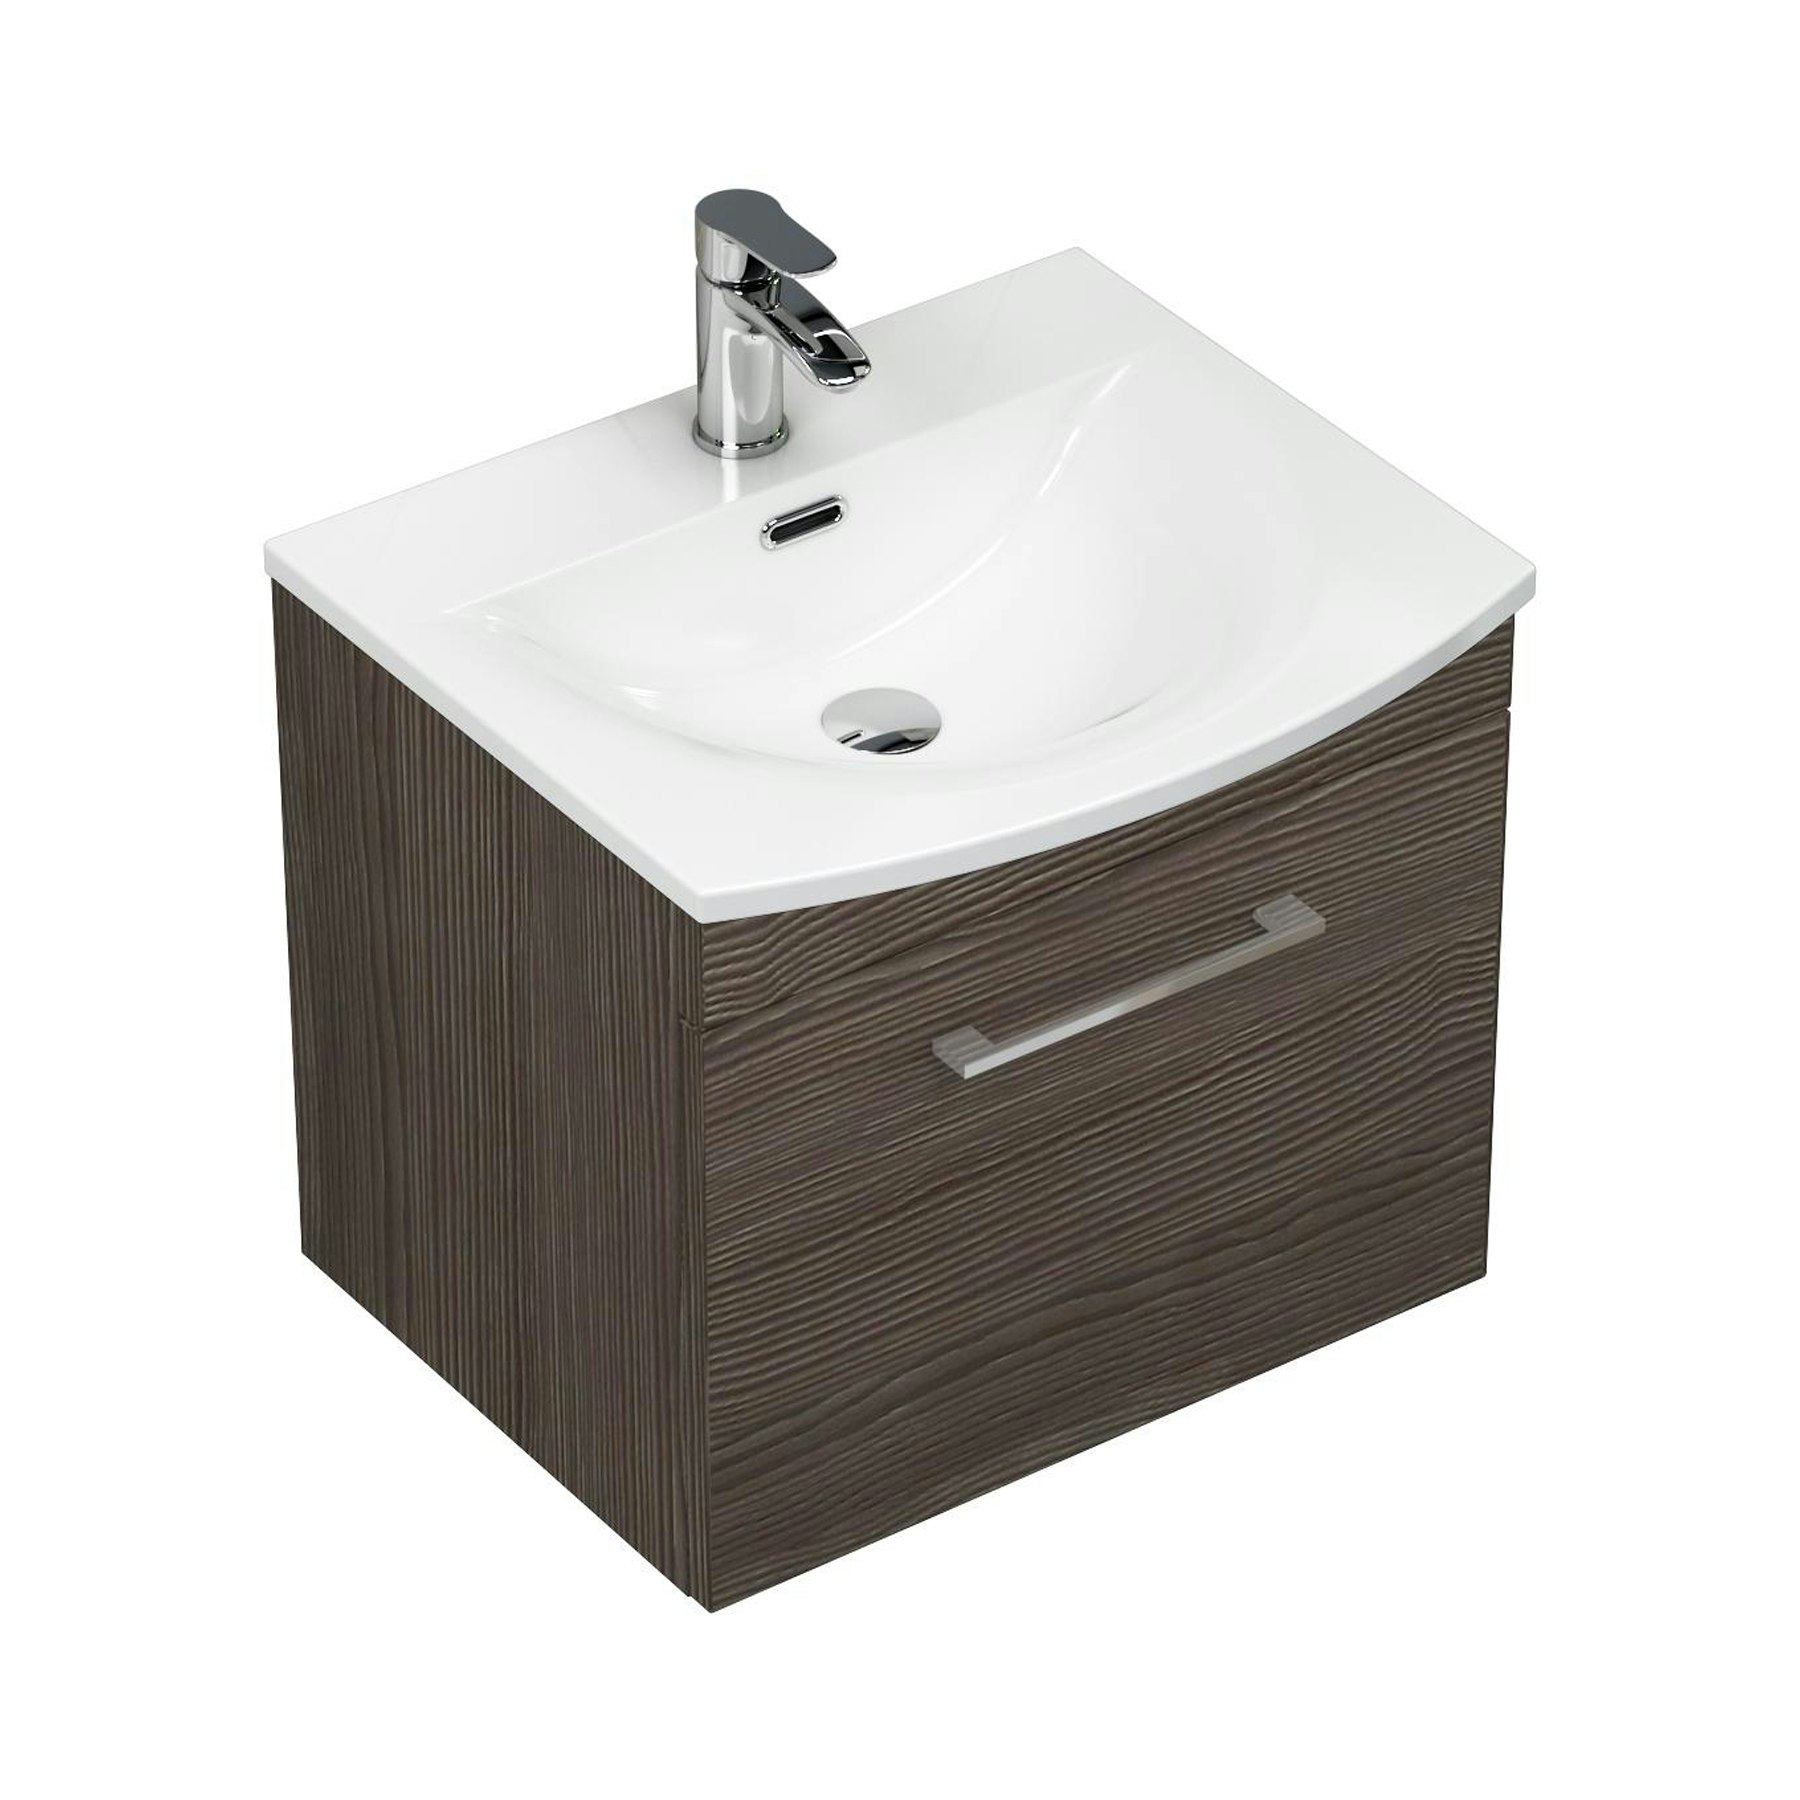 Marbella 500mm Wall Hung Vanity Unit with 1 Drawer Grey Elm Cabinet & Curved Basin